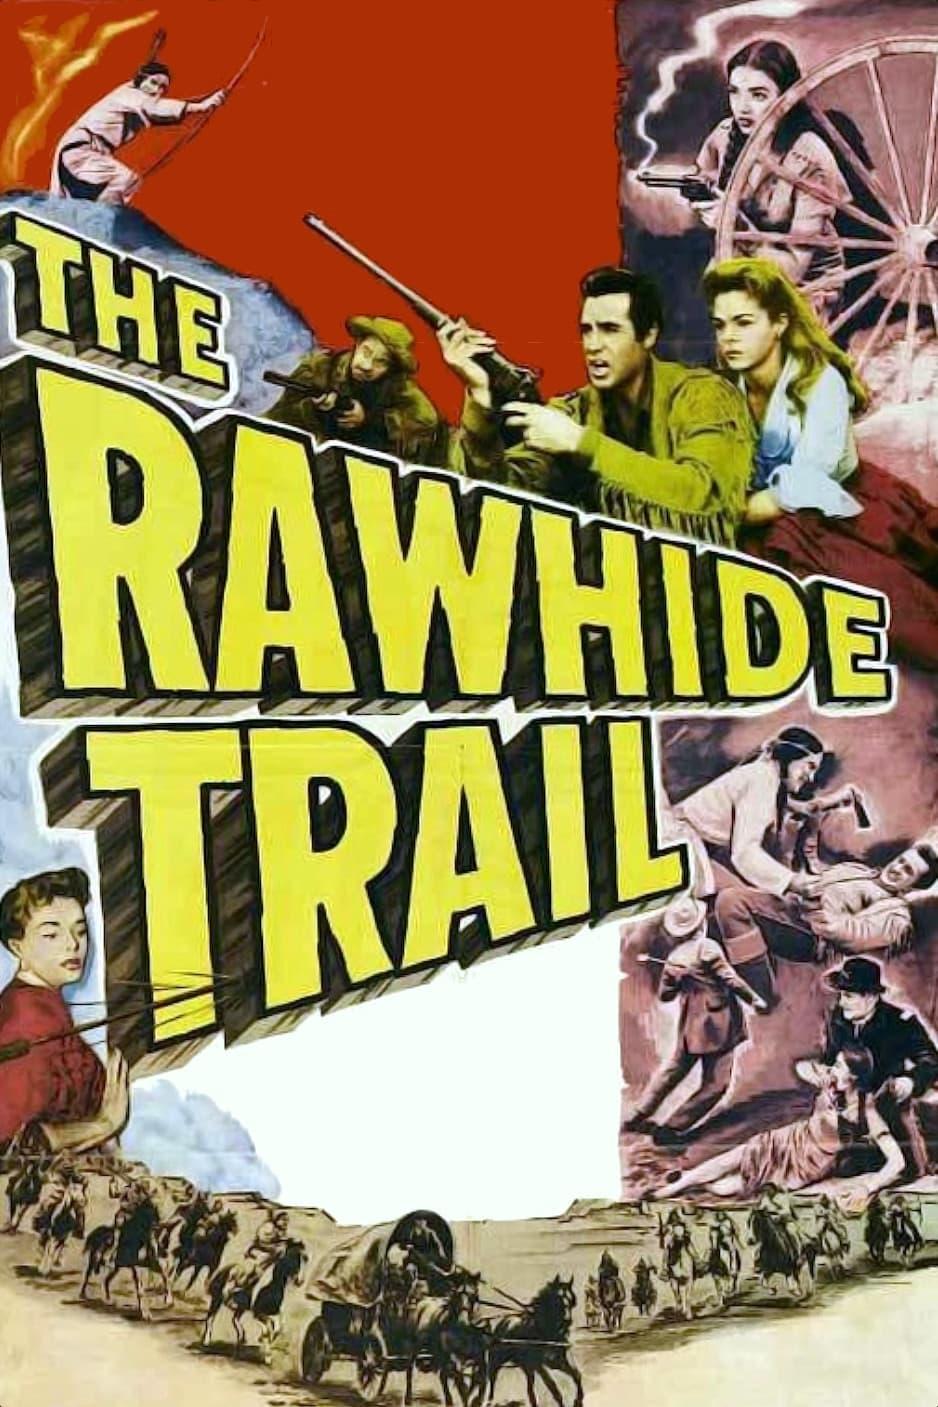 The Rawhide Trail poster